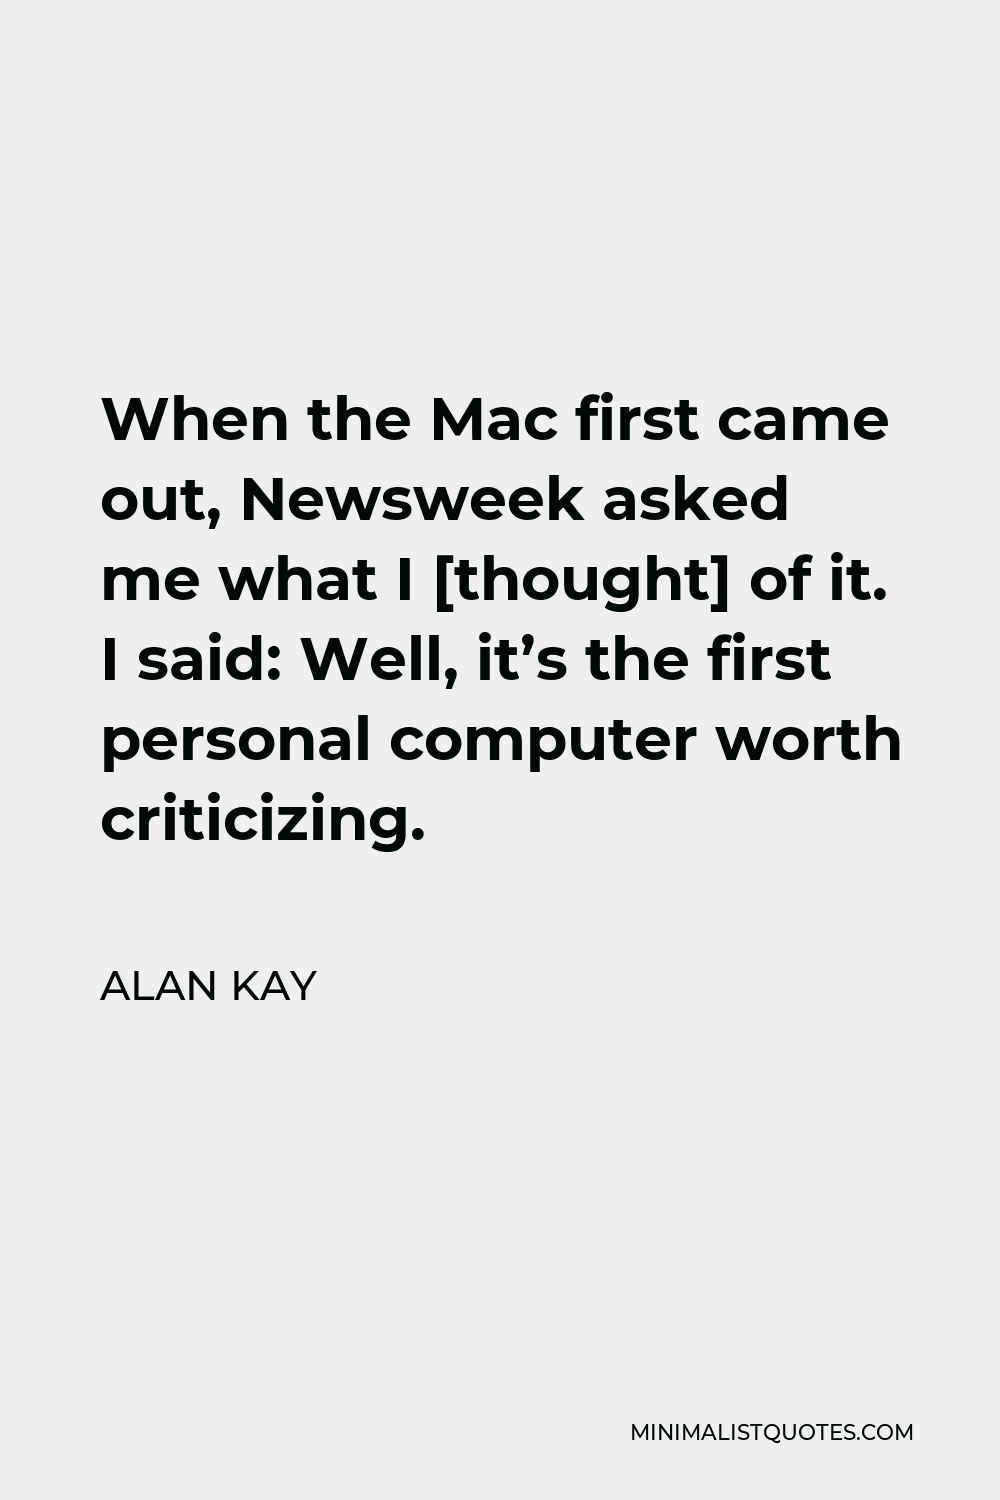 Alan Kay Quote - When the Mac first came out, Newsweek asked me what I [thought] of it. I said: Well, it’s the first personal computer worth criticizing.